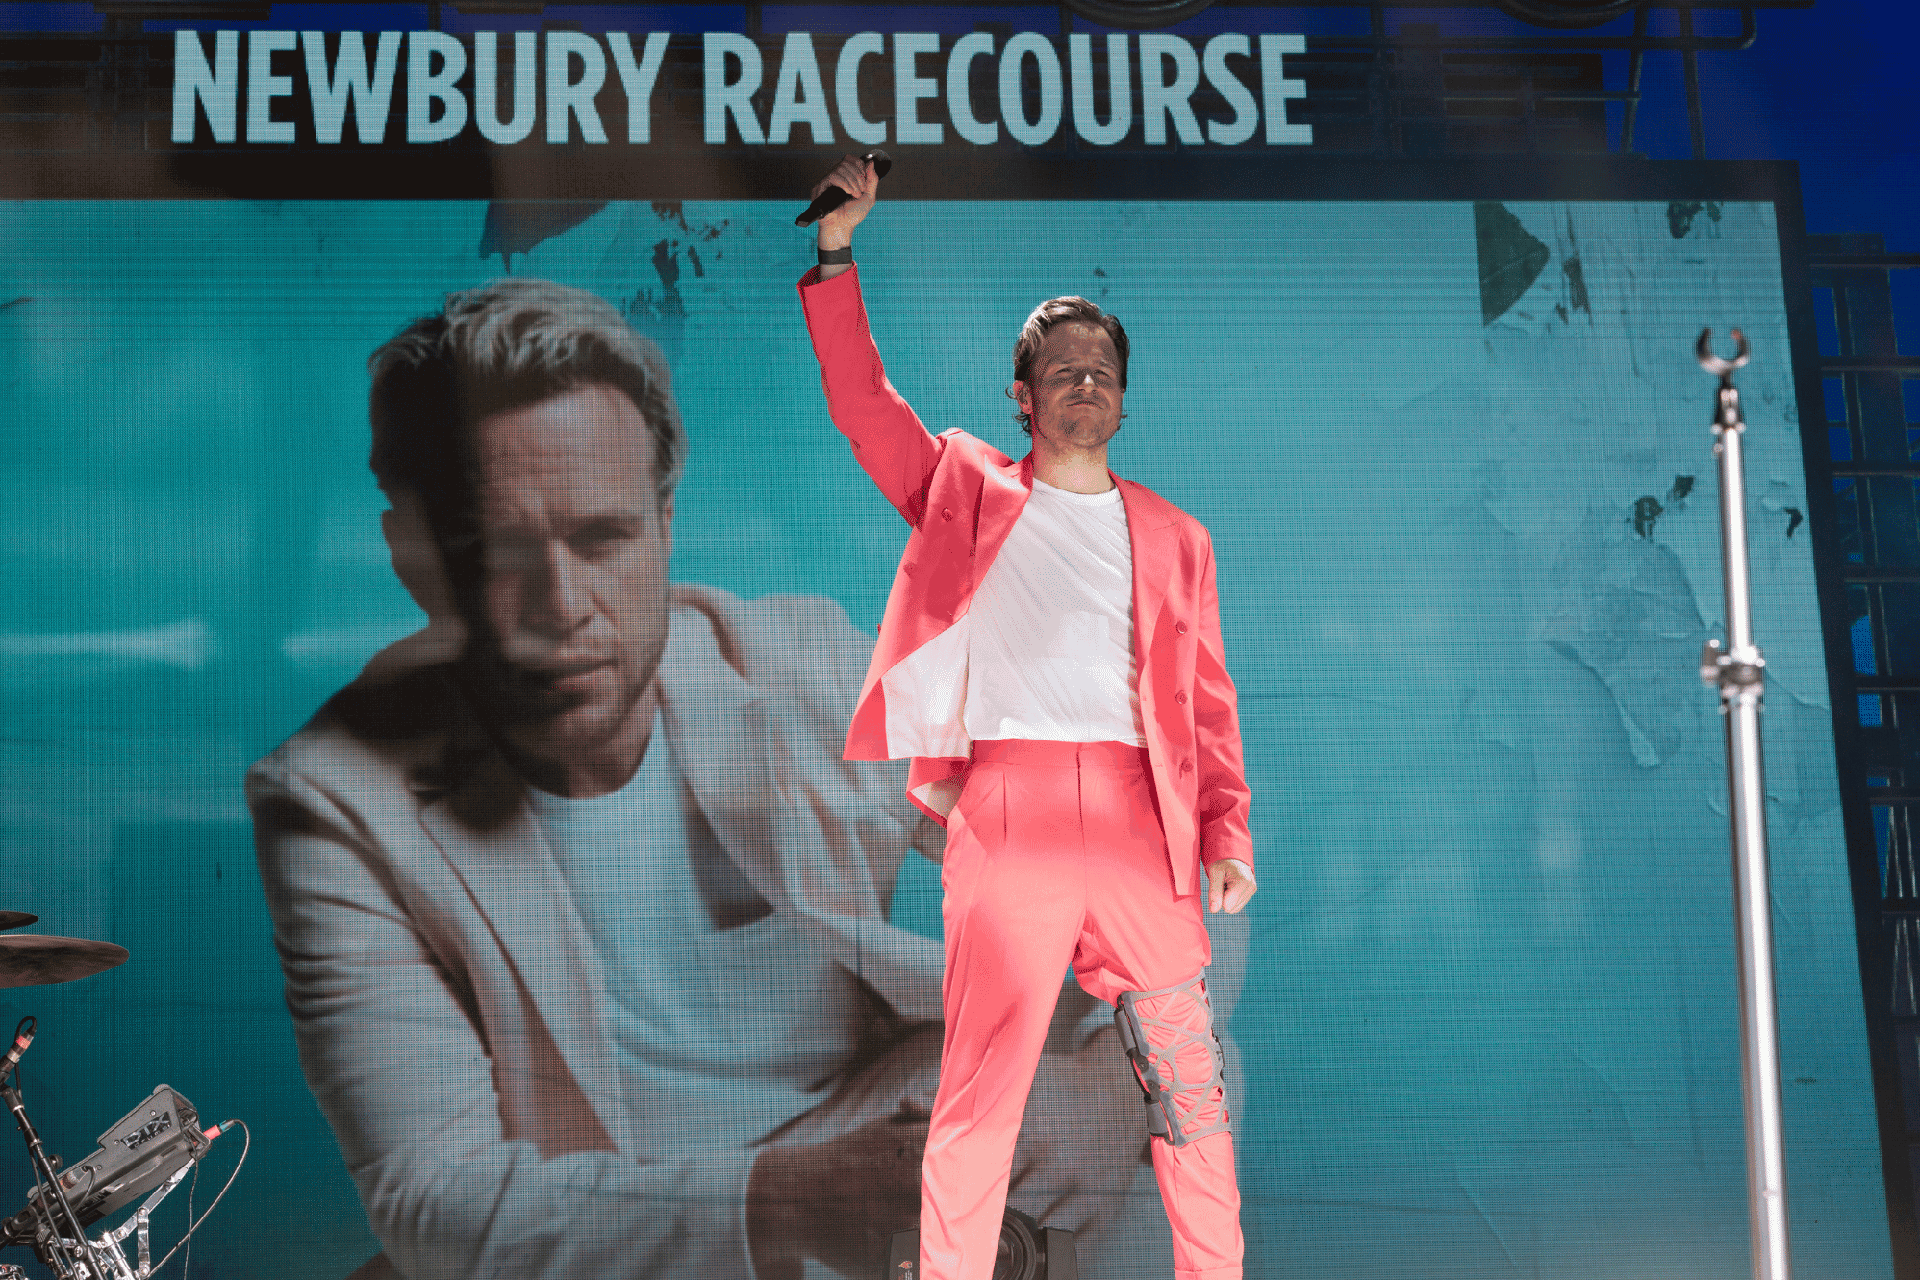 Olly Murs on stage at Newbury Racecourse wearing a coral pink suit.